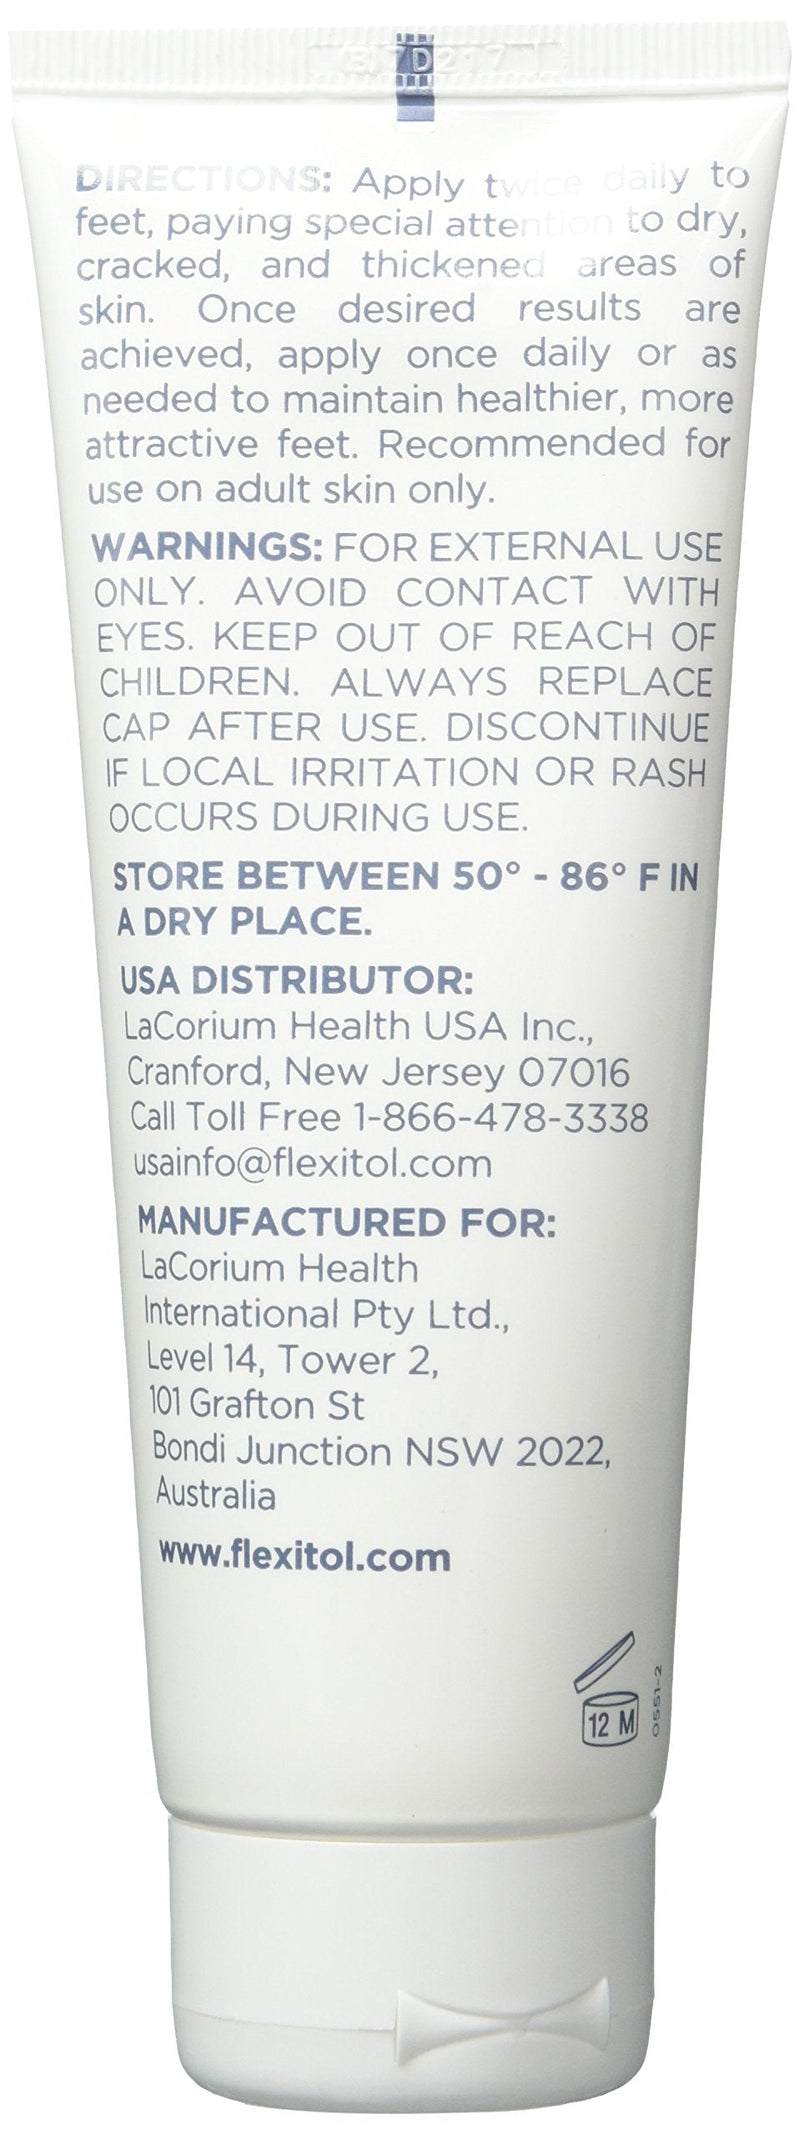 [Australia] - Flexitol Heel Balm 4 Oz Tube (Pack of 2), Rich Moisturizing & Exfoliating Foot Cream. Fast Relief of Rough, Dry & Cracked Skin on Heels/Feet. For Daily Use and Pedicures. Diabetic Safe and Effective 4 Ounce (Pack of 2) 